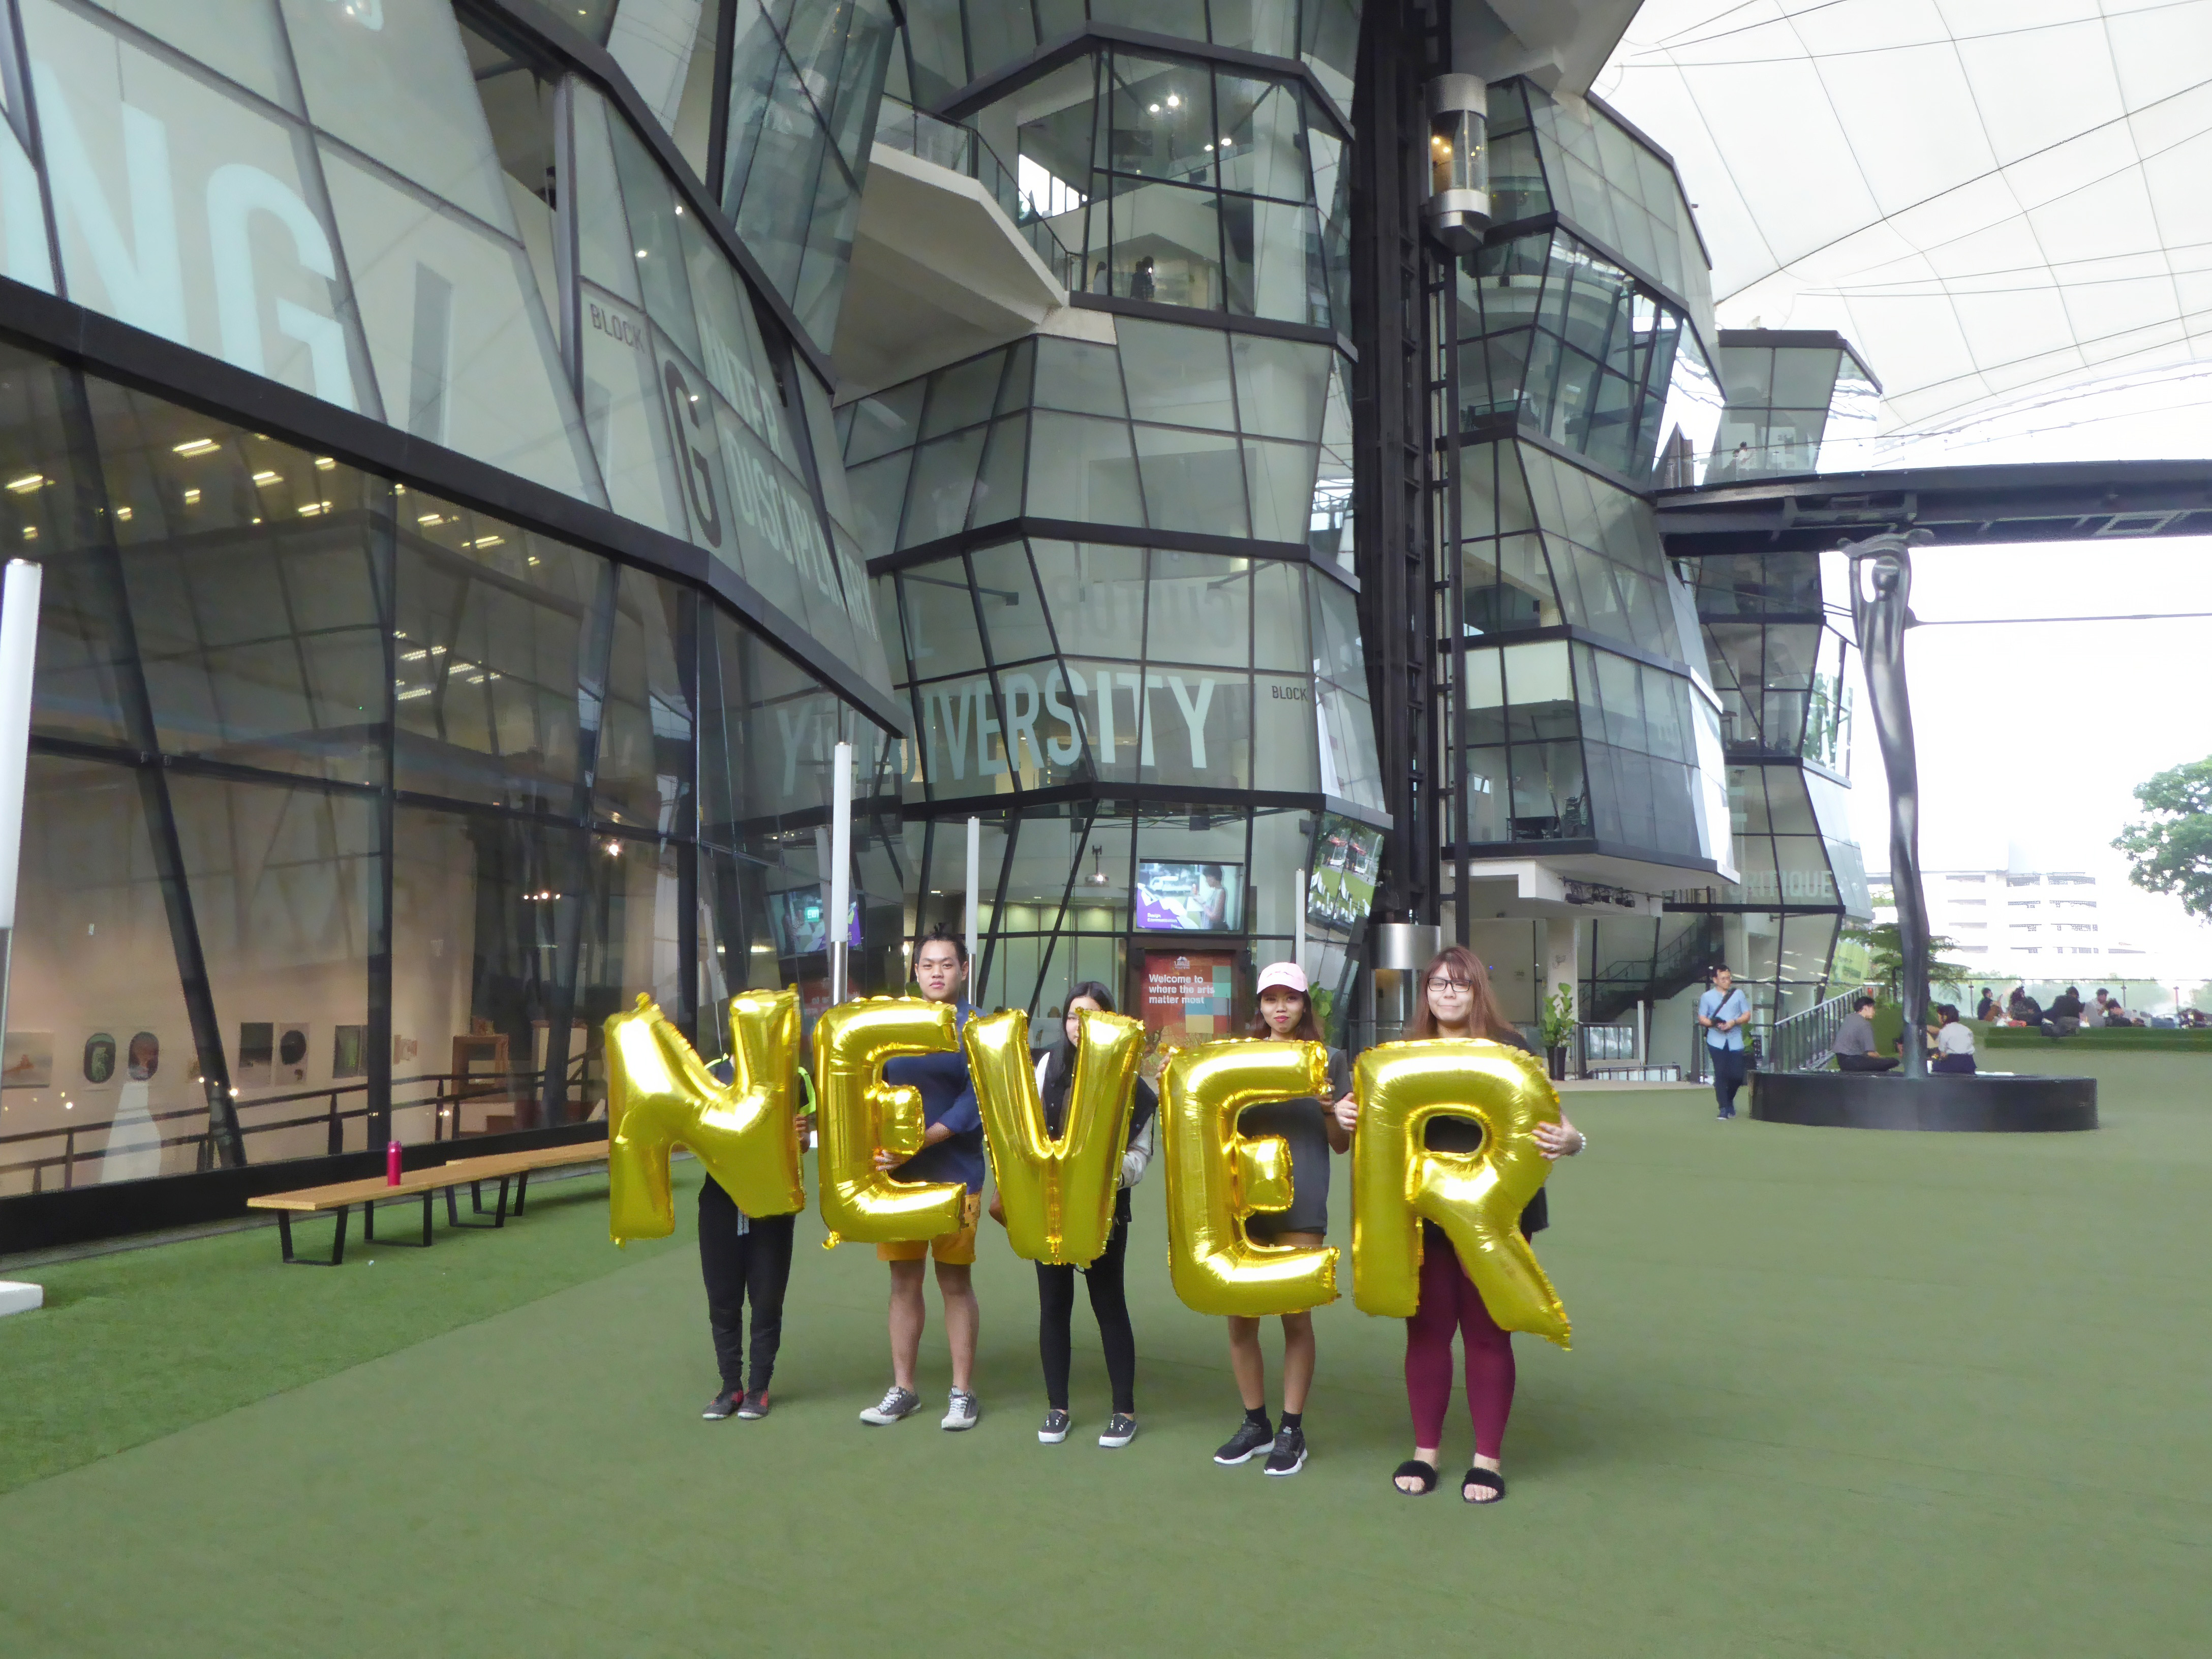 Singapore, LASALLE College of the Arts - Silence was Golden, gold balloons